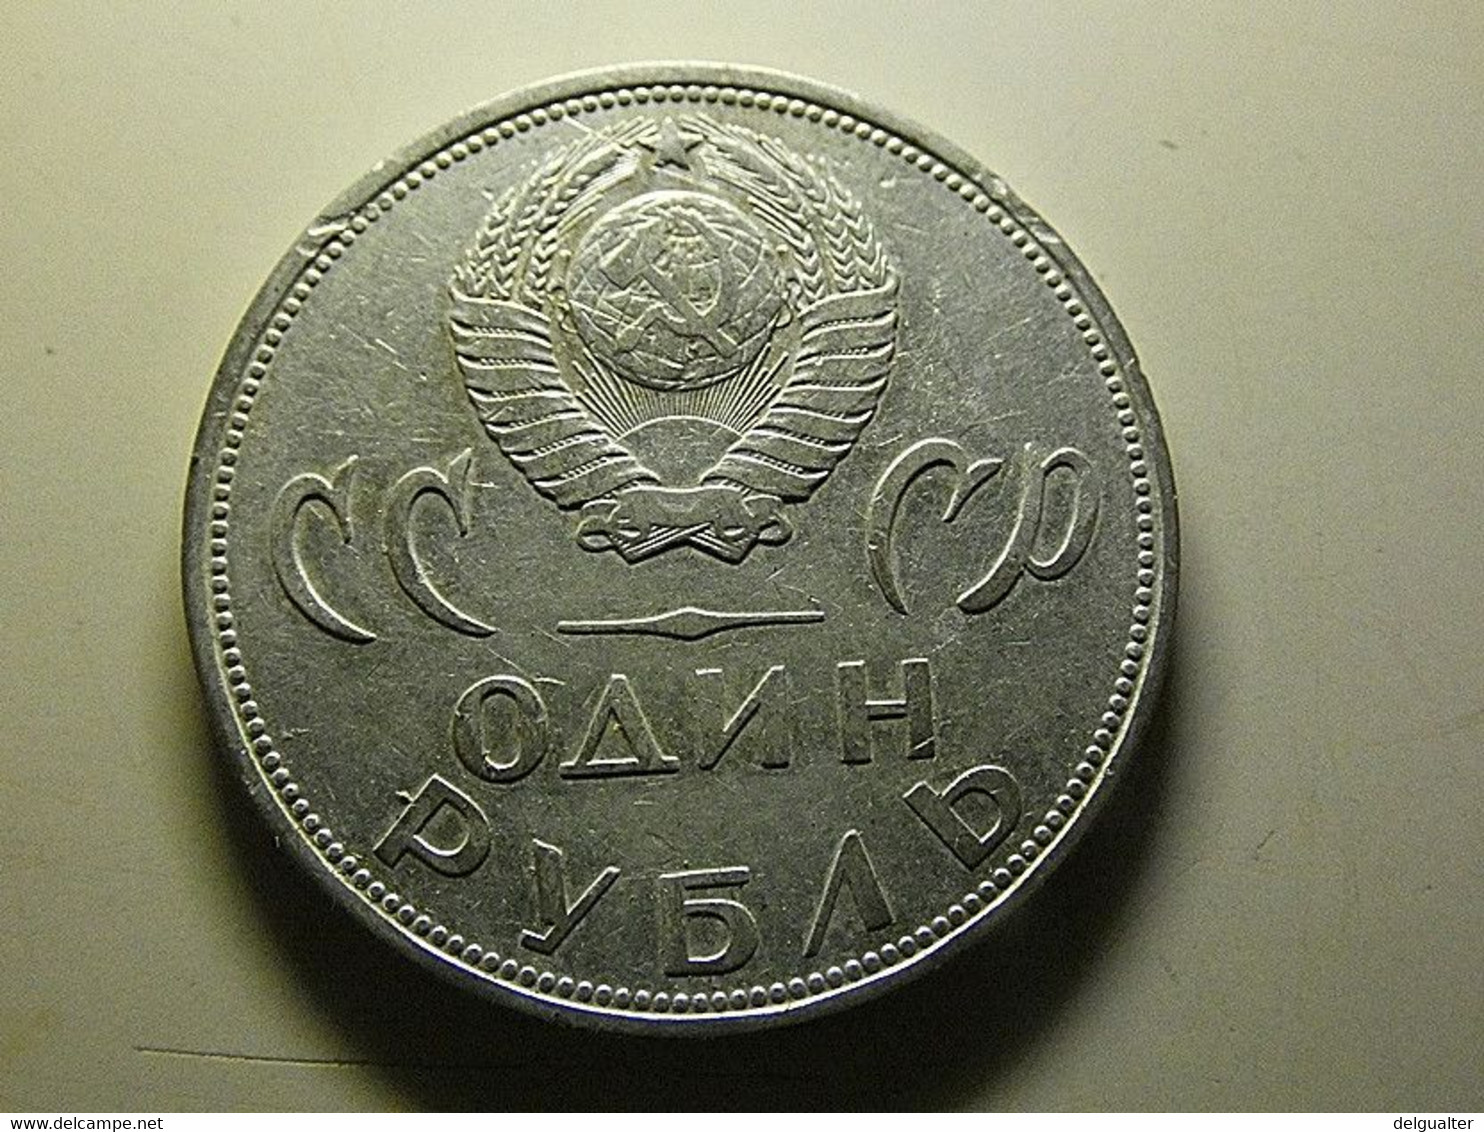 Russia 1 Rouble - Rusland